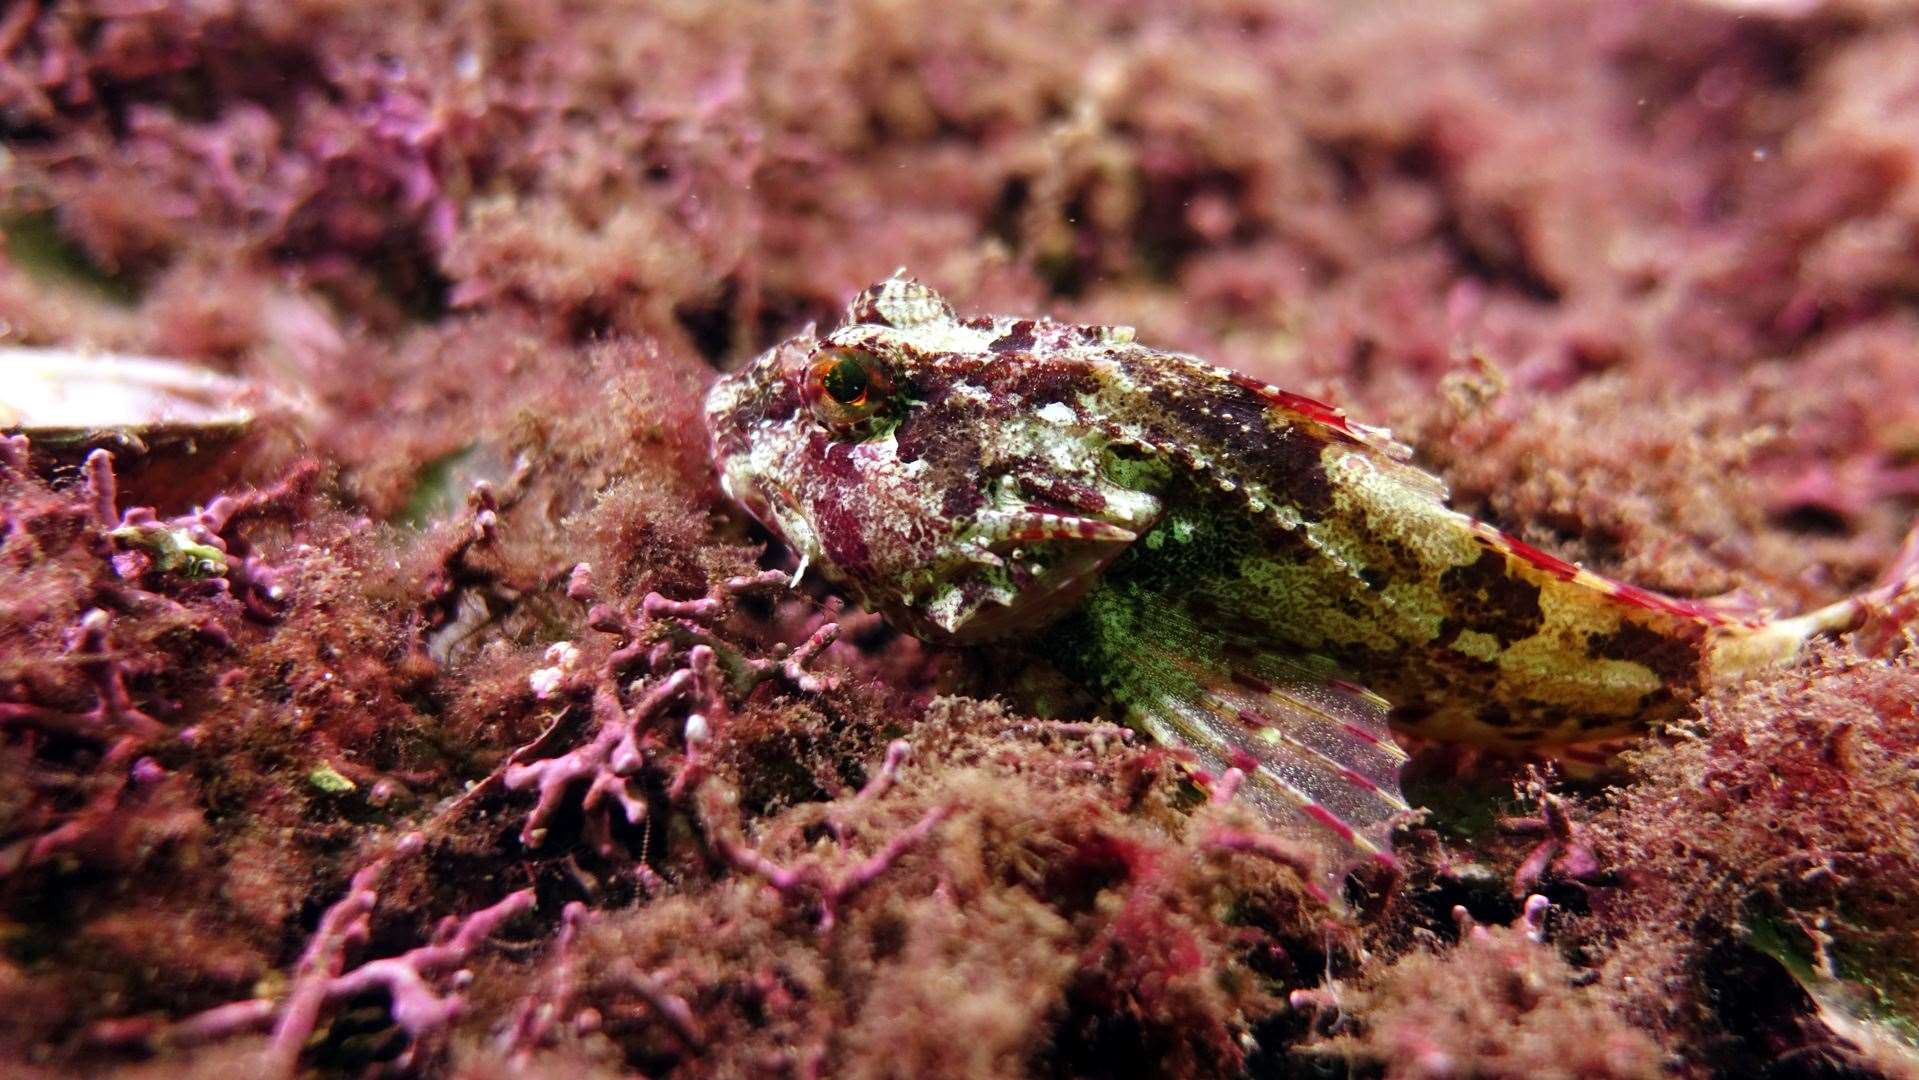 Scorpion fish on maerl. Picture: Howard Wood